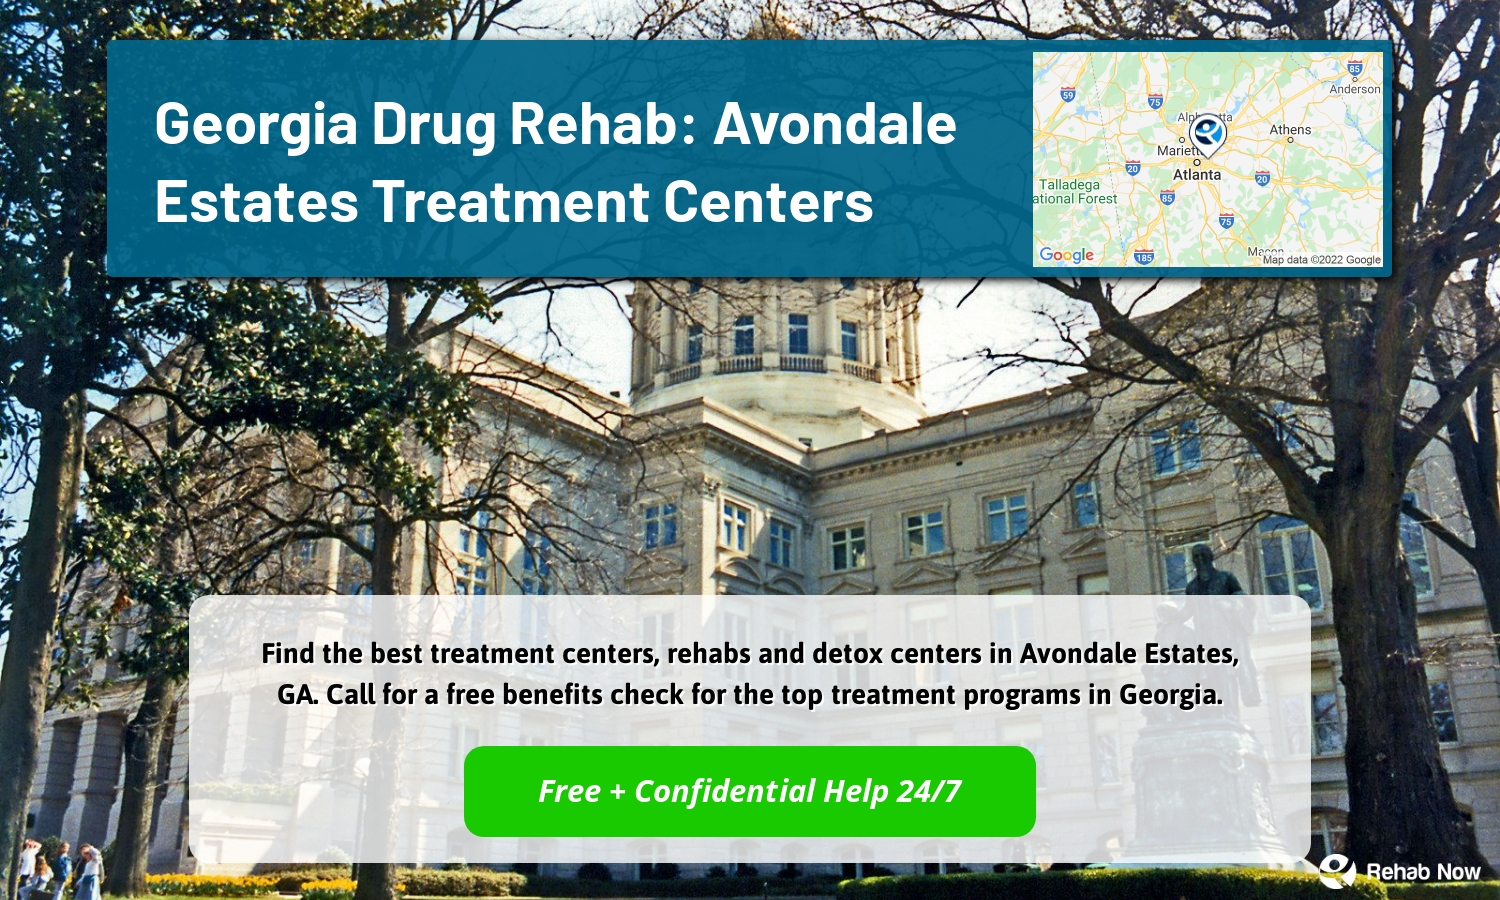 Find the best treatment centers, rehabs and detox centers in Avondale Estates, GA. Call for a free benefits check for the top treatment programs in Georgia.